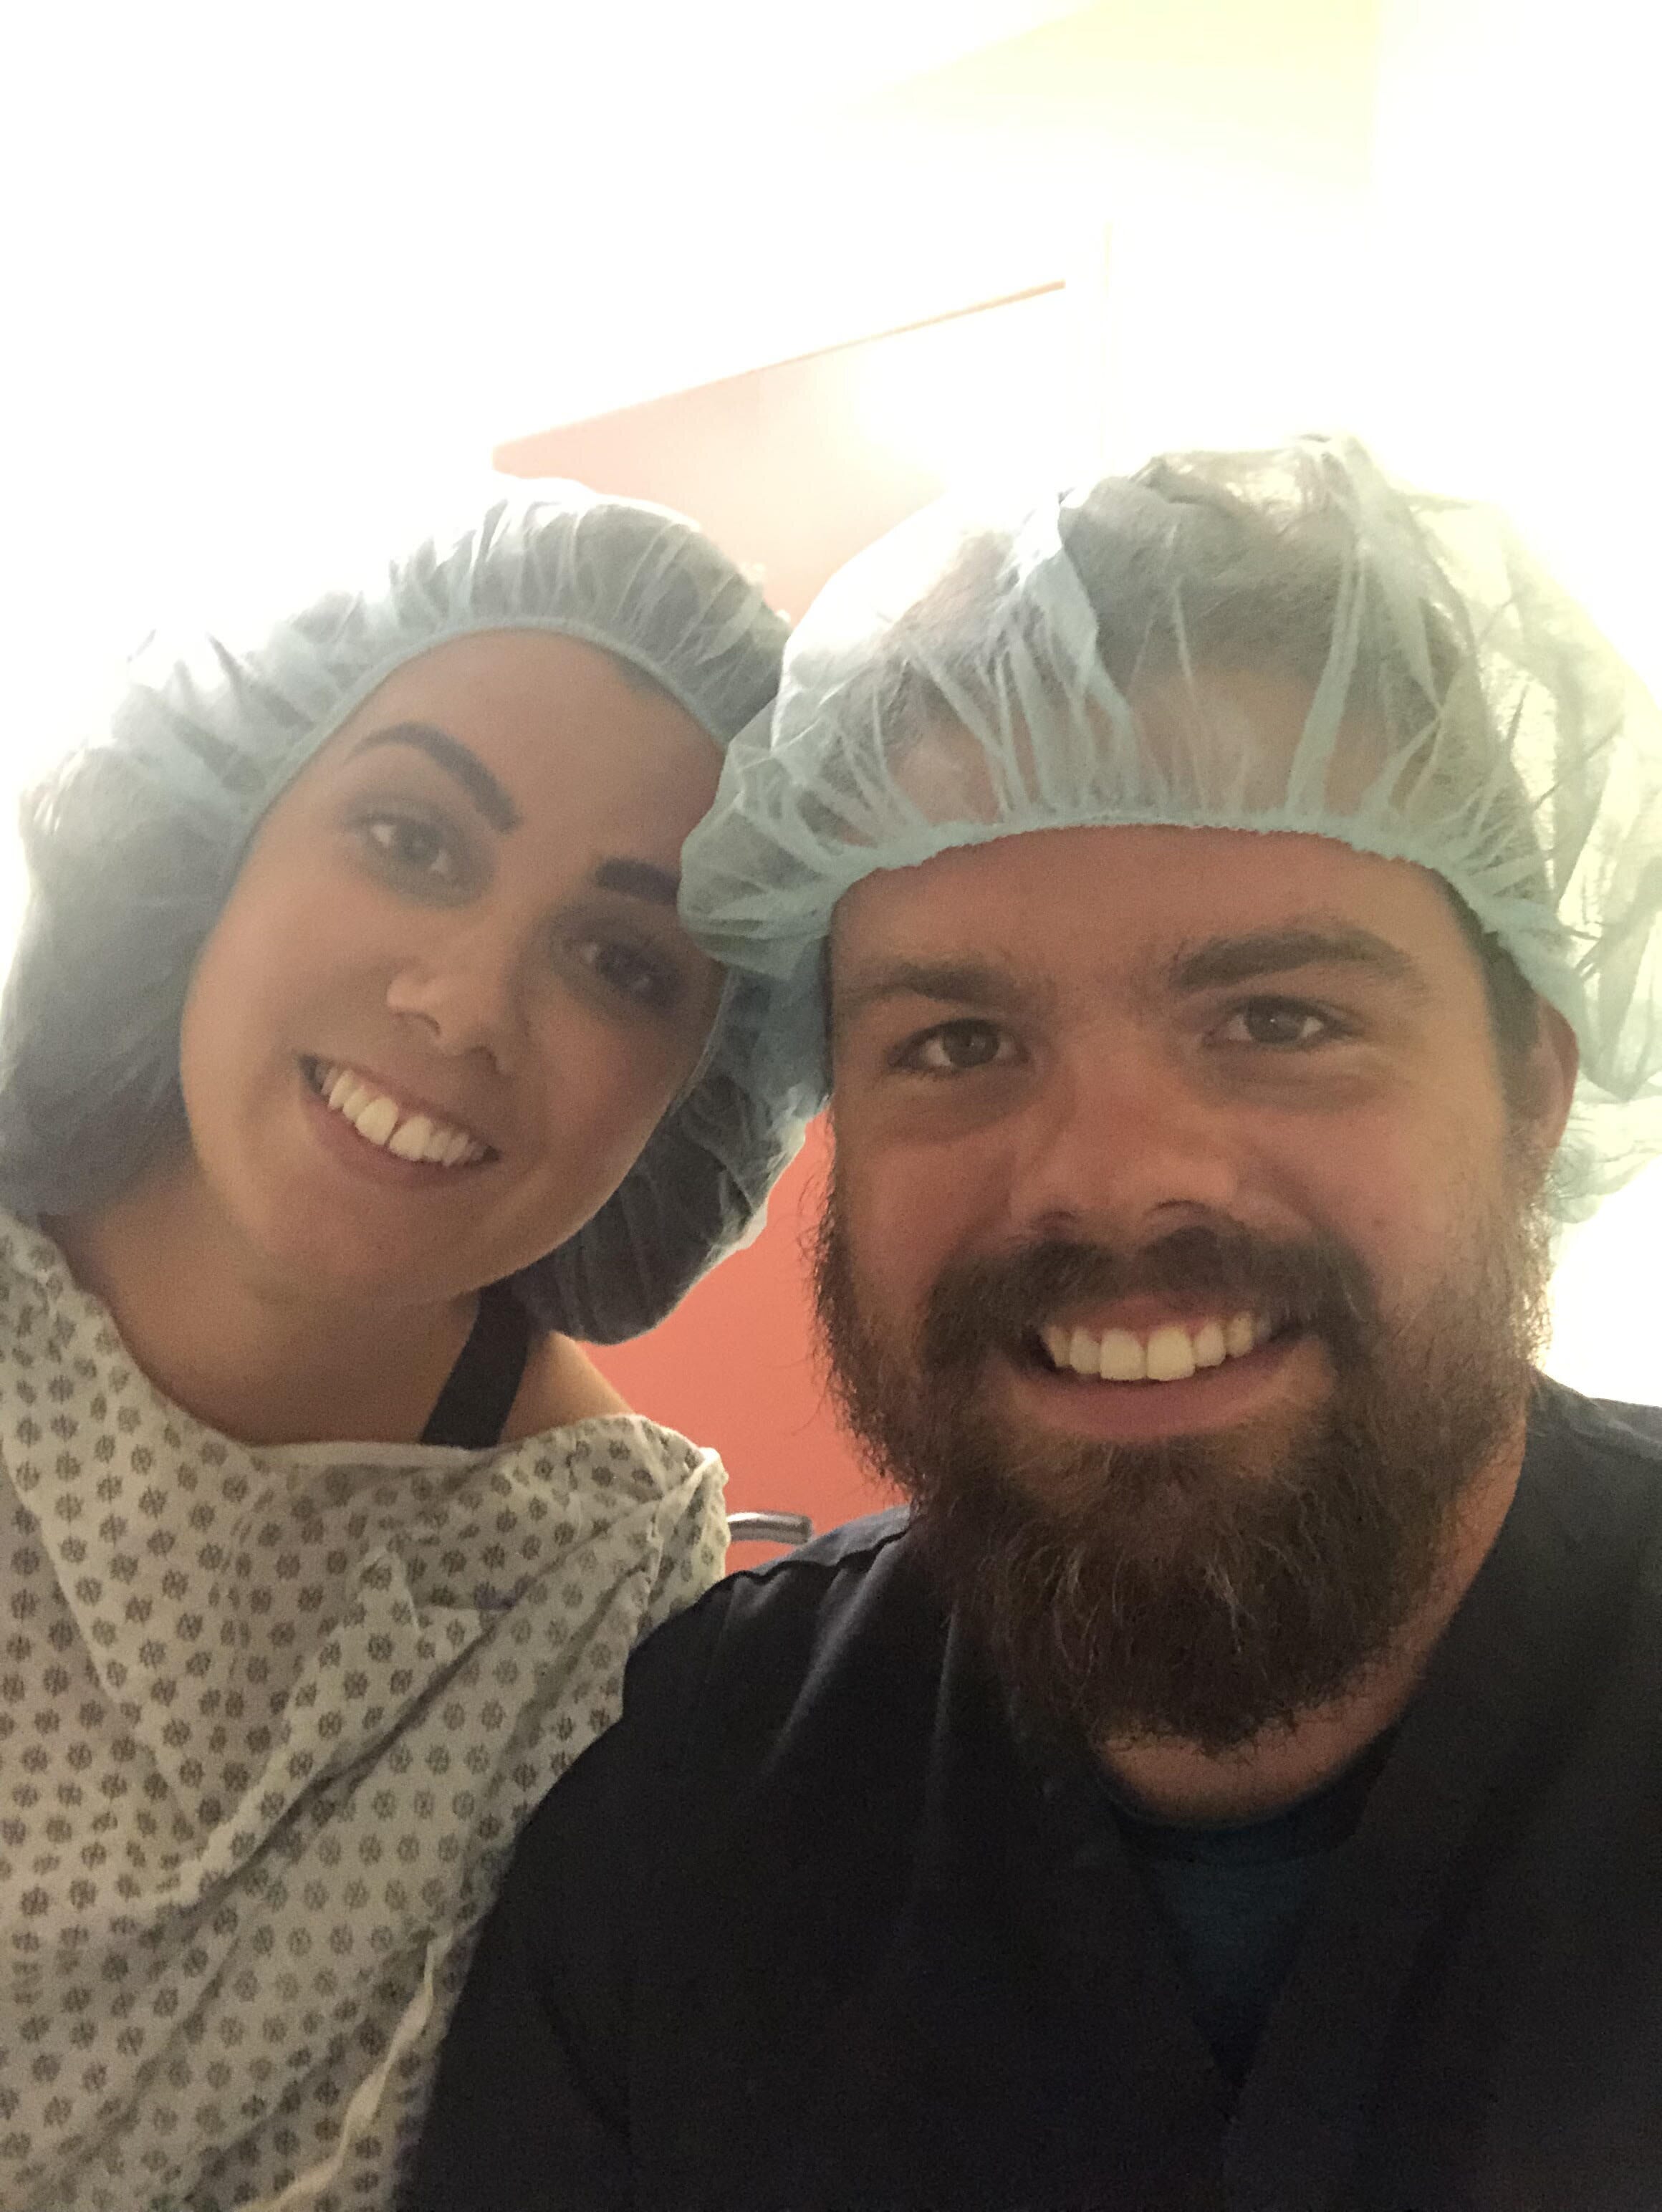 fertility warrior amy baker and her husband in the fertility clinic